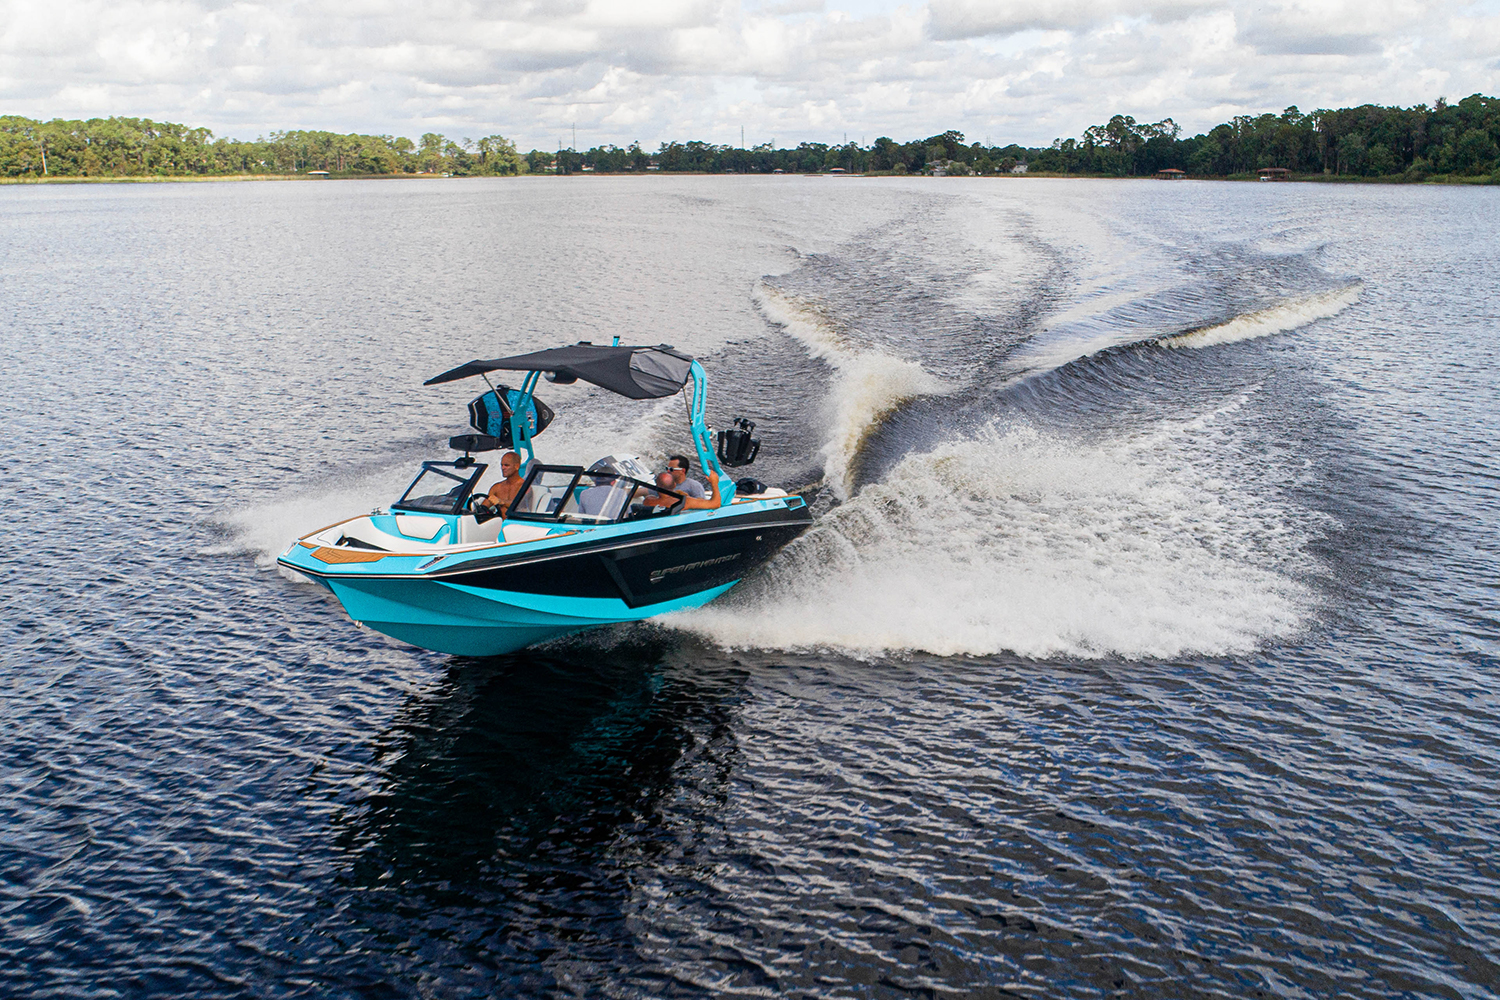 The Super Air Nautique GS22E electric wakesurfing and wakeboarding boat cruising on a lake. Correct Craft launched the all-electric towboat in 2020.